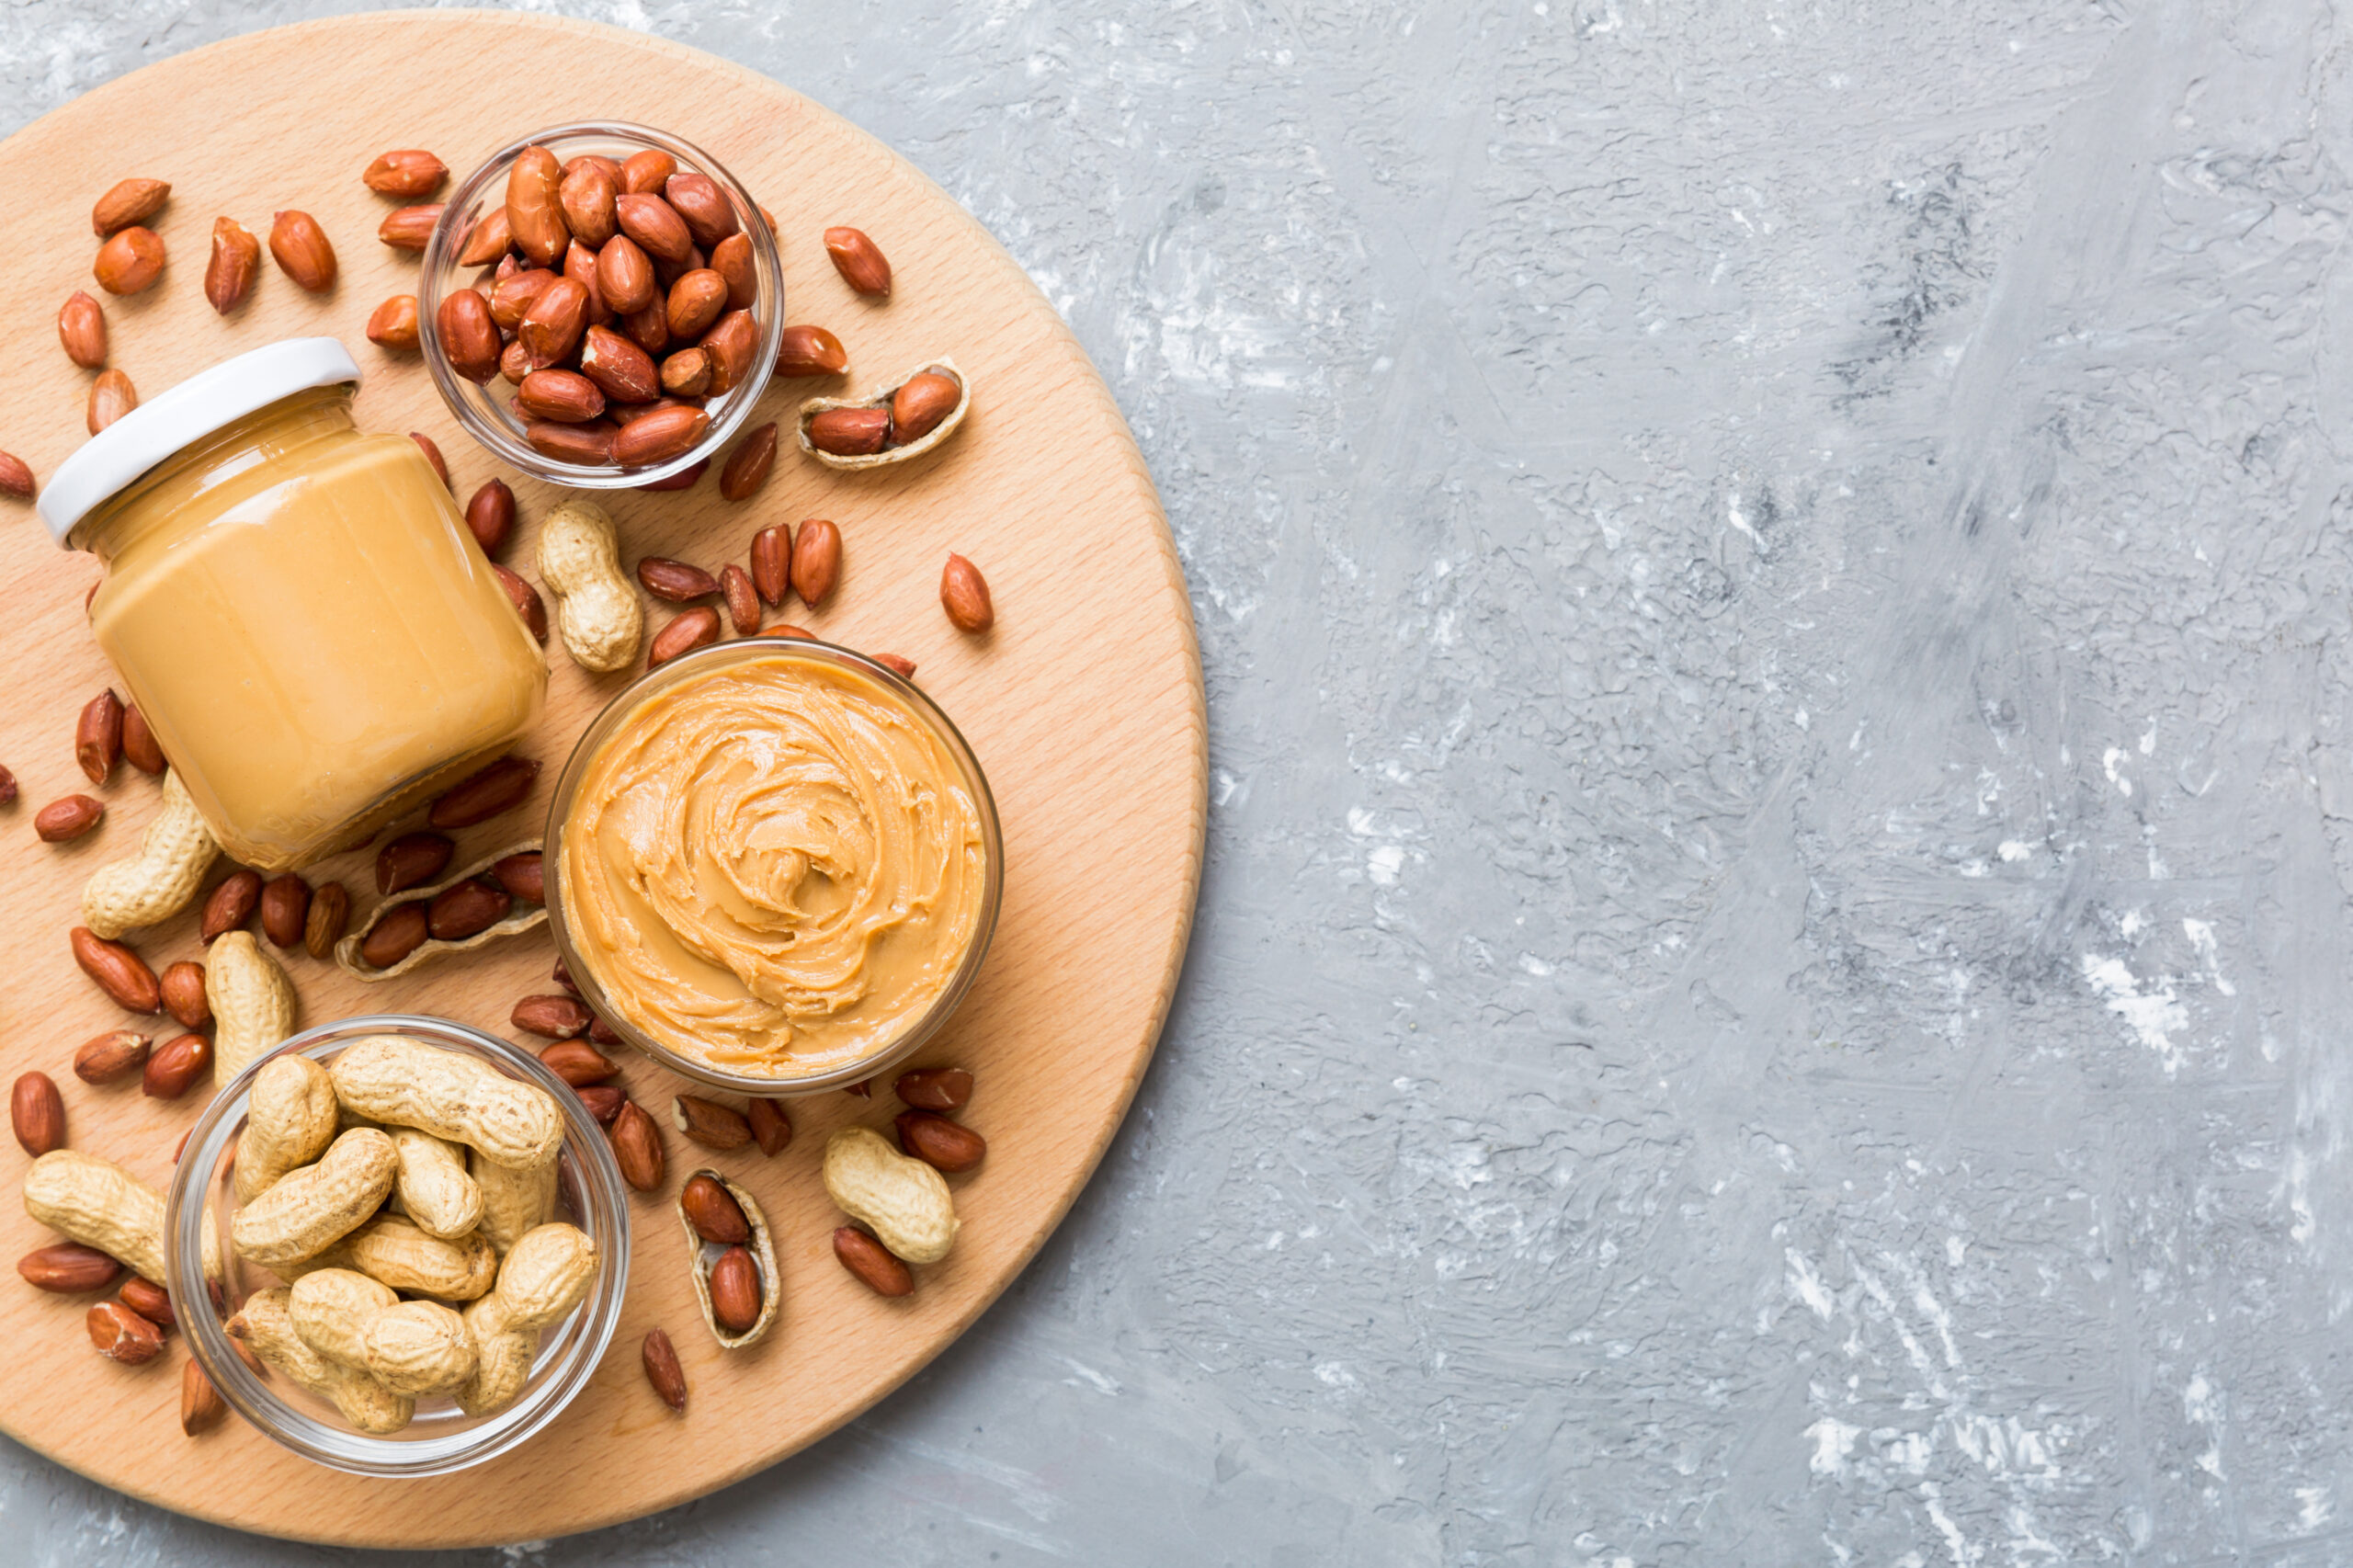 Bowl of peanut butter and peanuts on table background. top view with copy space. Creamy peanut pasta in small bowl.